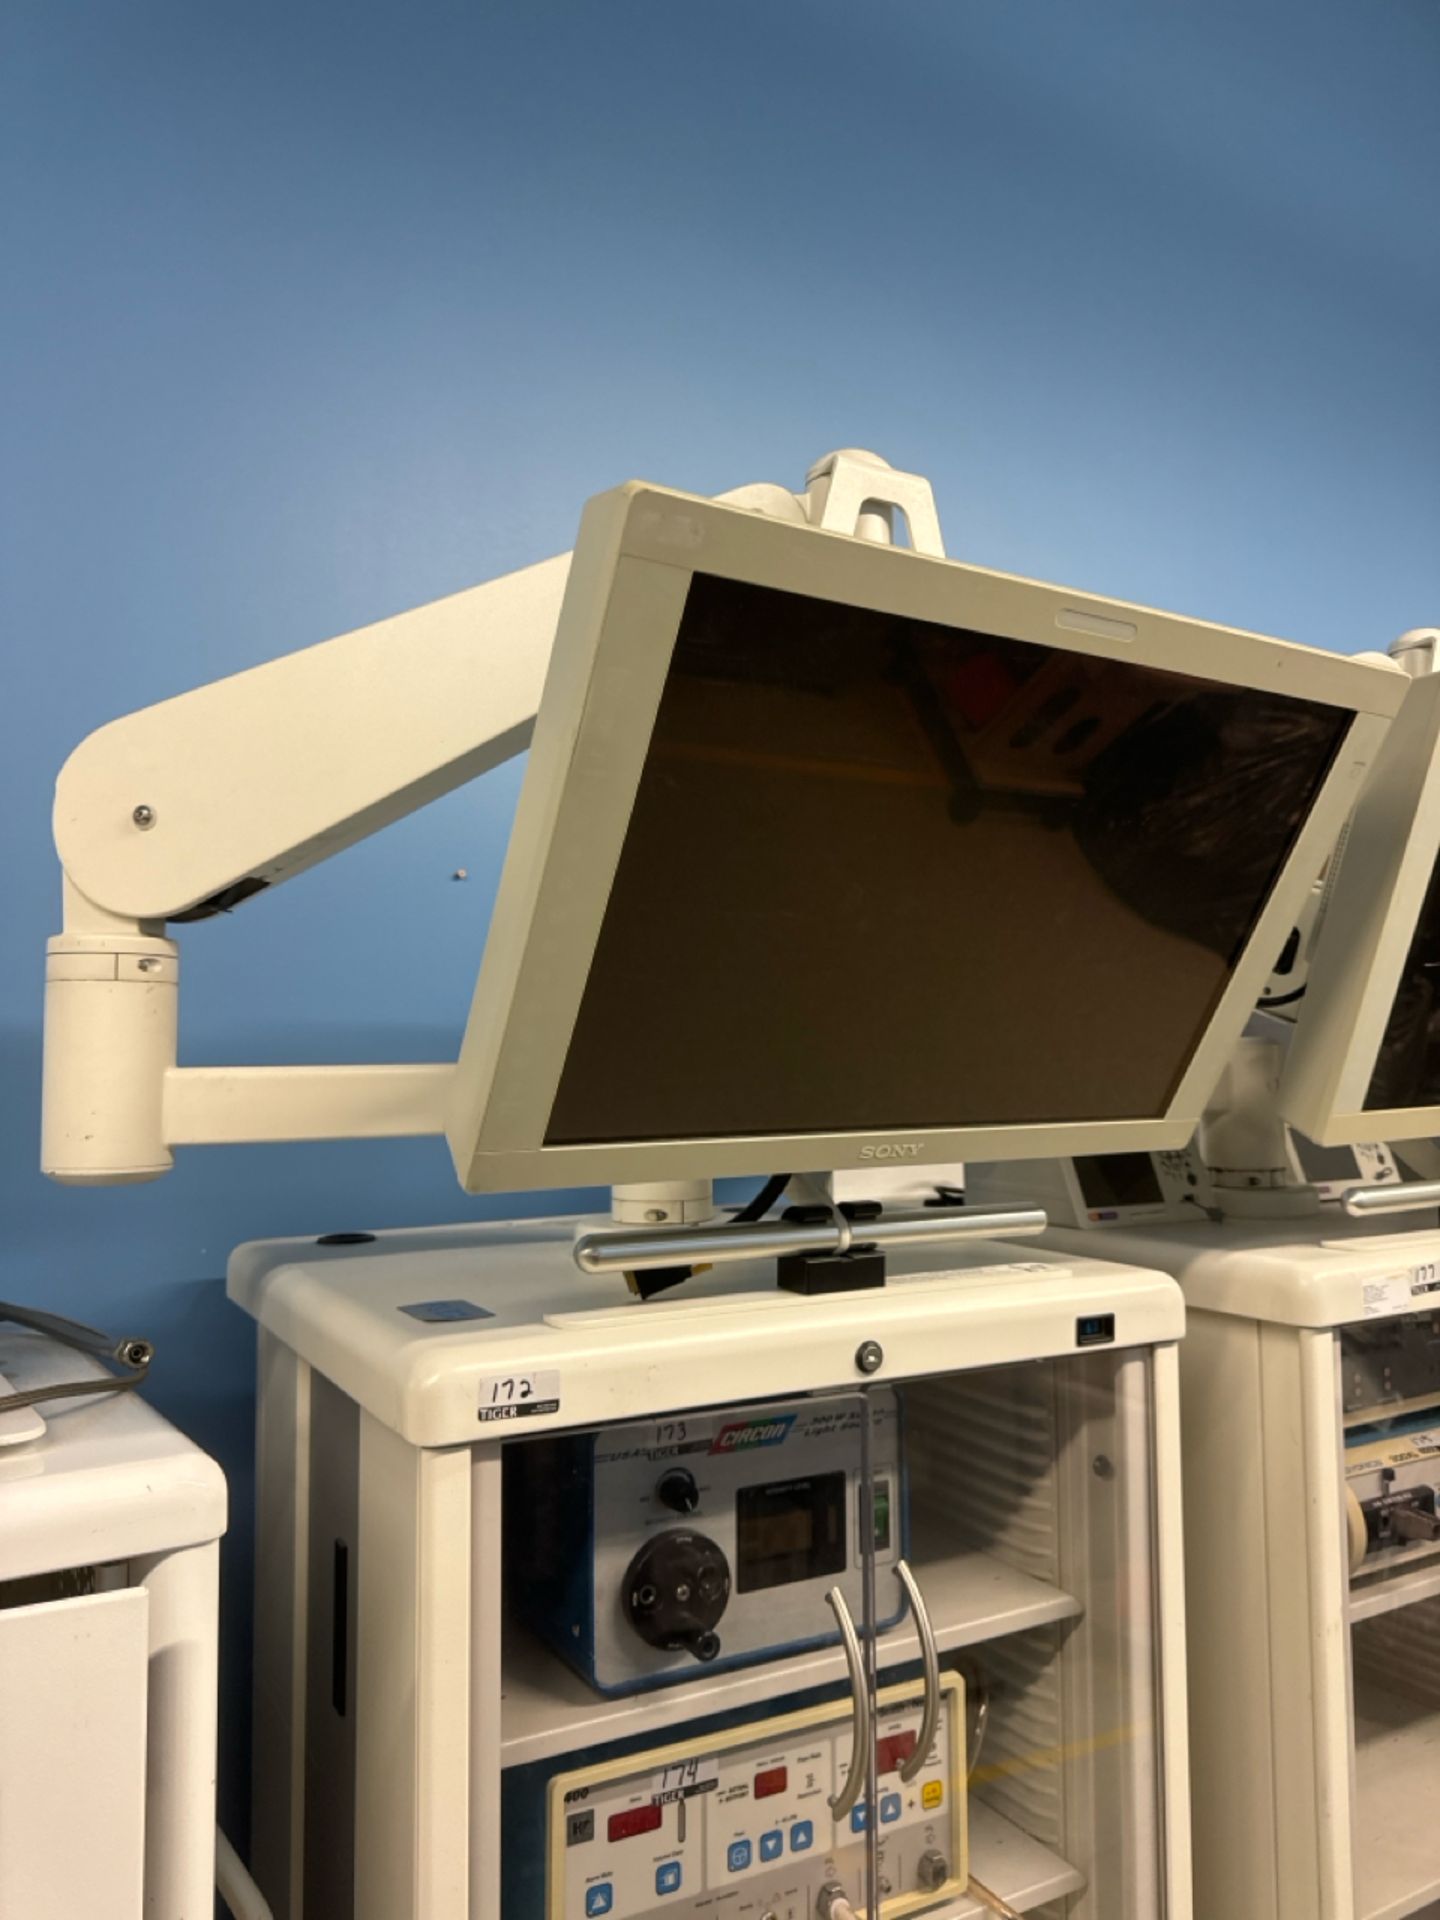 ProMedica Mobile Flex Case w/ Sony Monitor Attachment (Contents Not Included) - Image 2 of 5